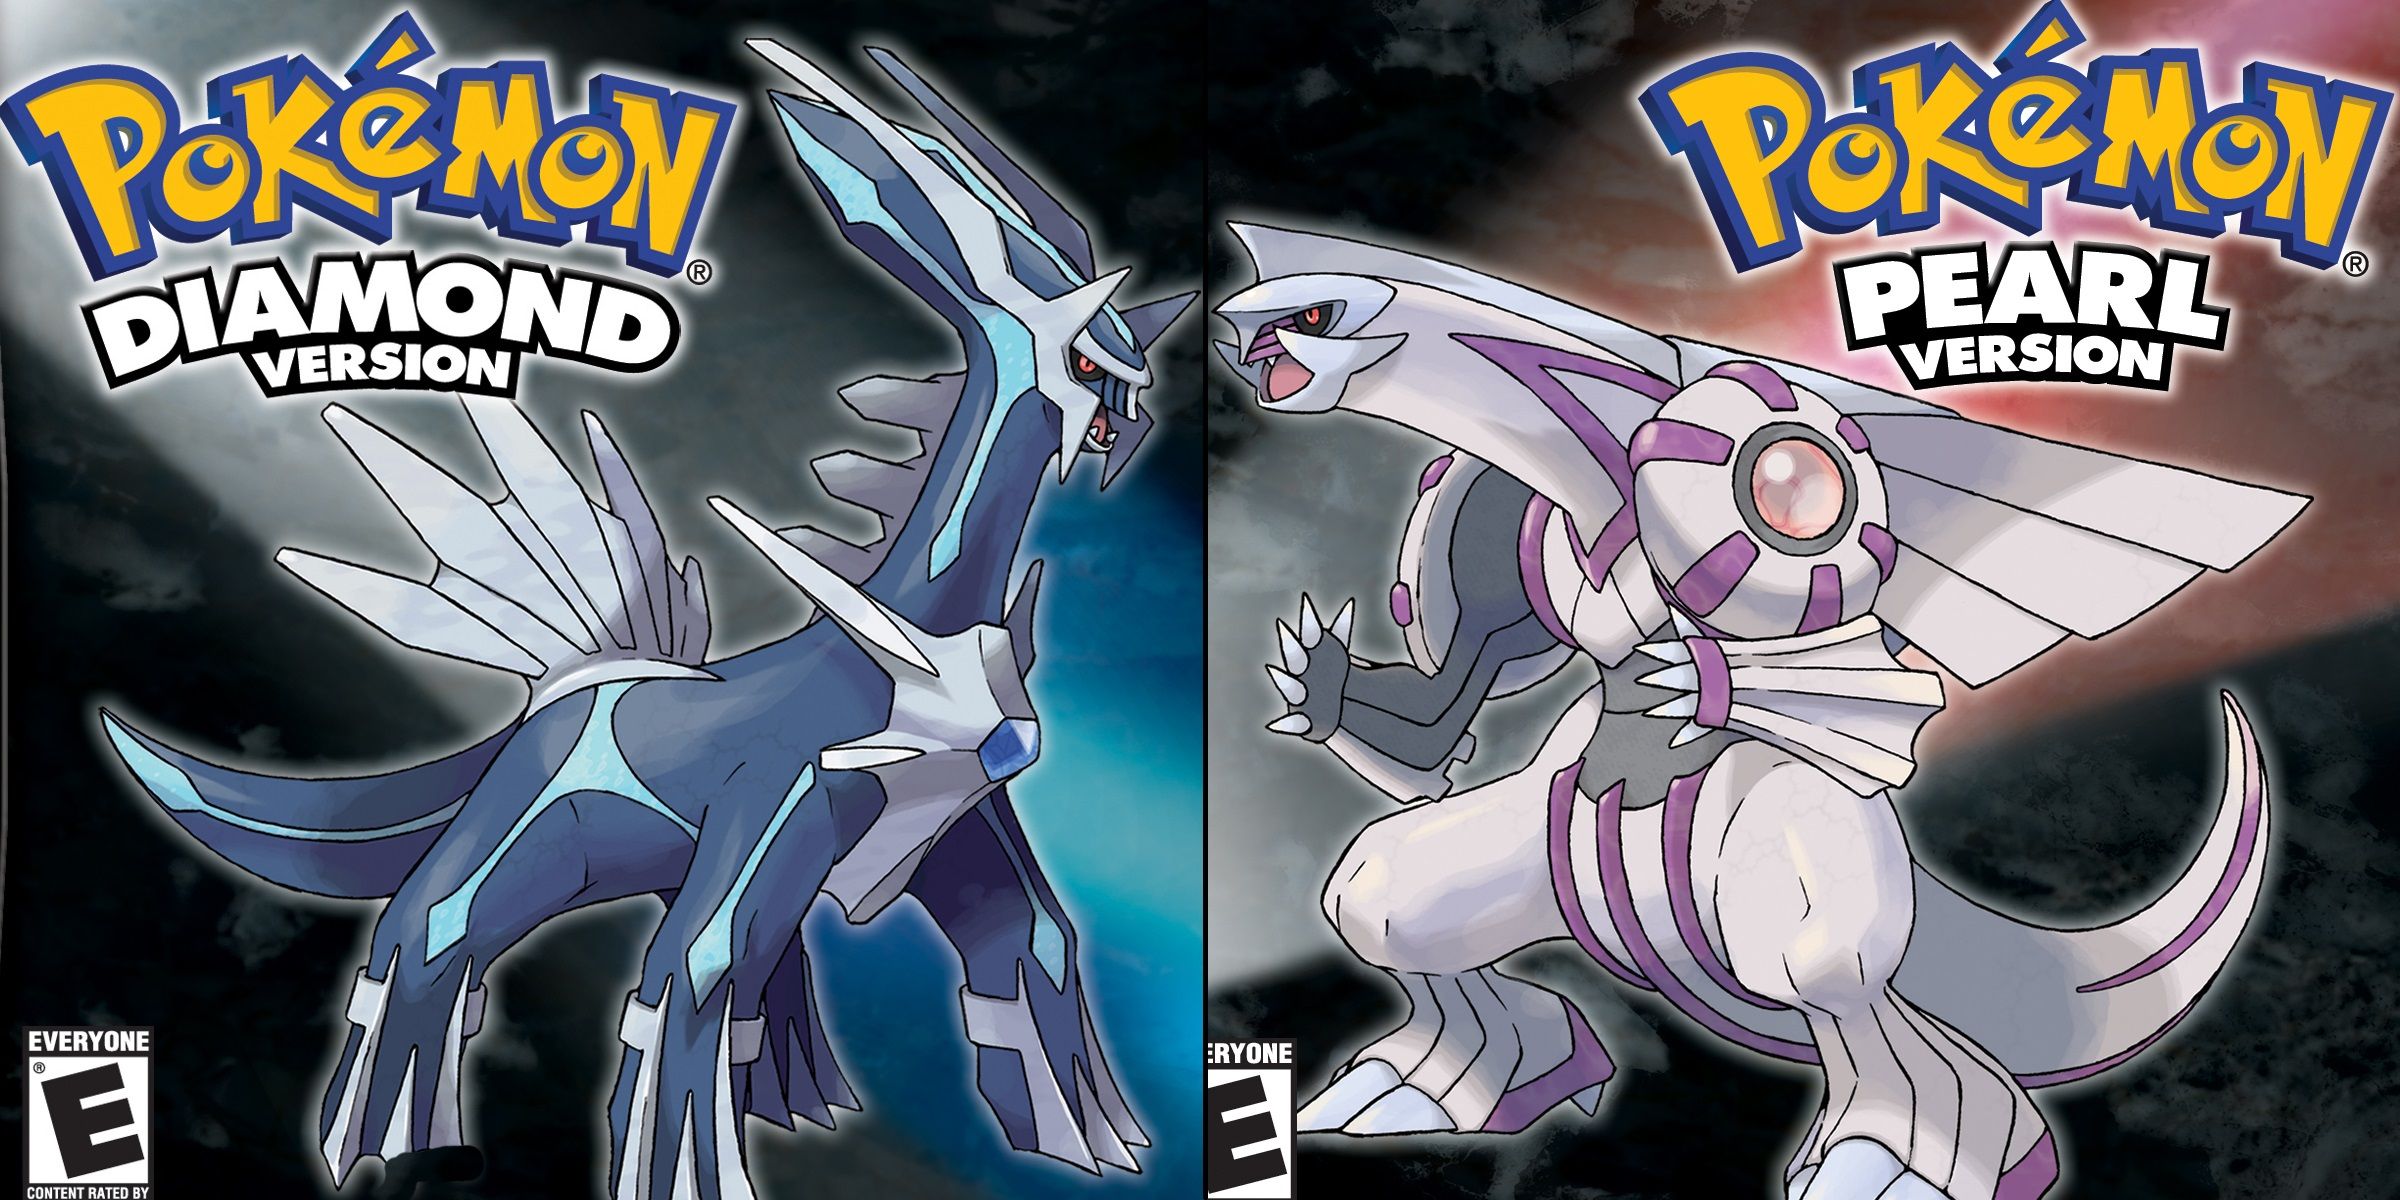 Why Pokémon Diamond and Pearl became the most anticipated remakes